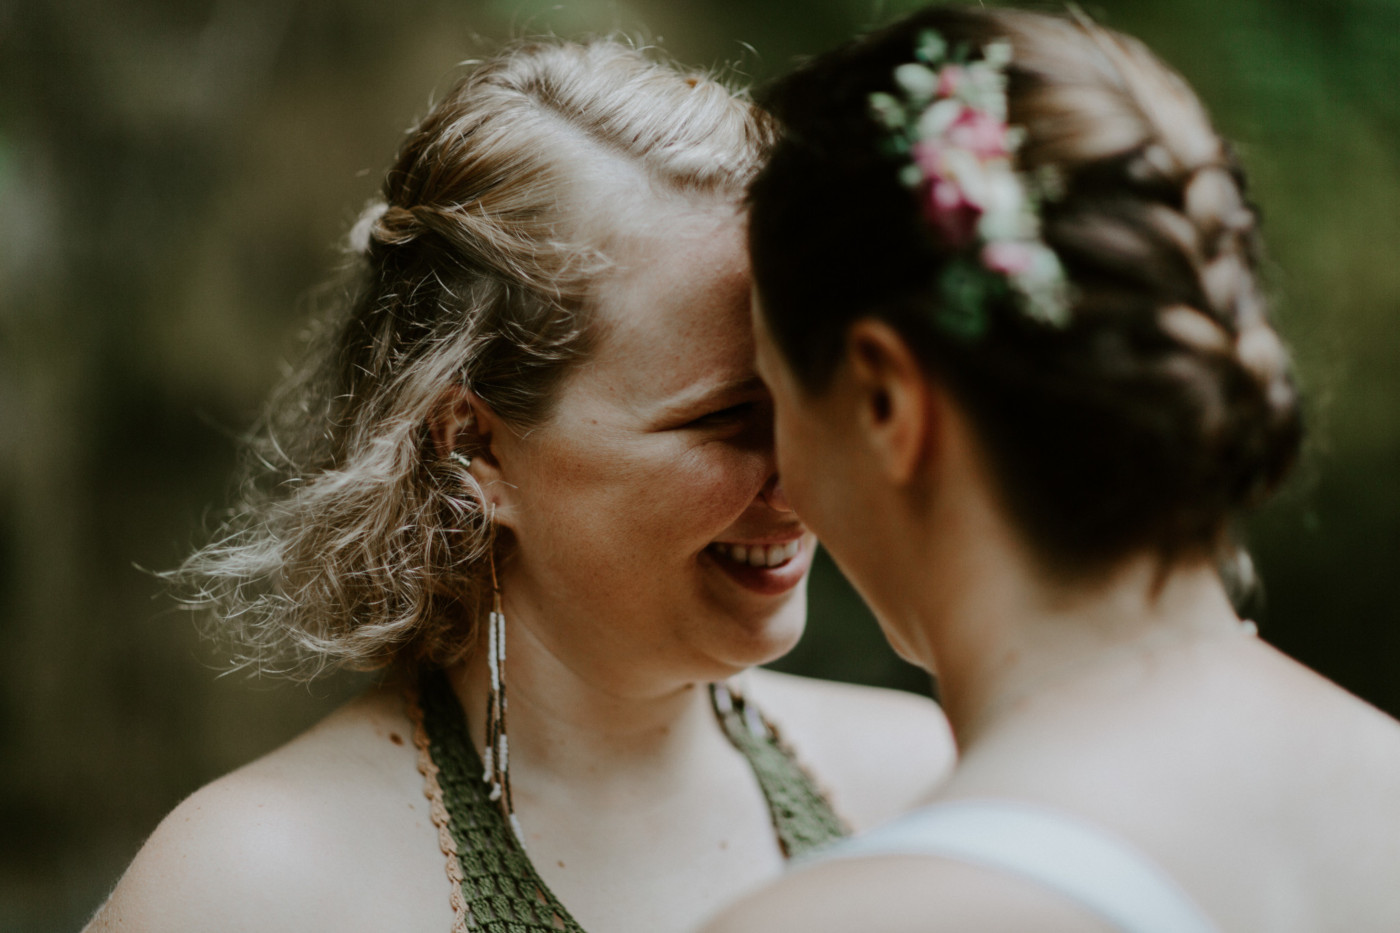 Kate and Audrey share a laugh. Elopement wedding photography at Bridal Veil Falls by Sienna Plus Josh.